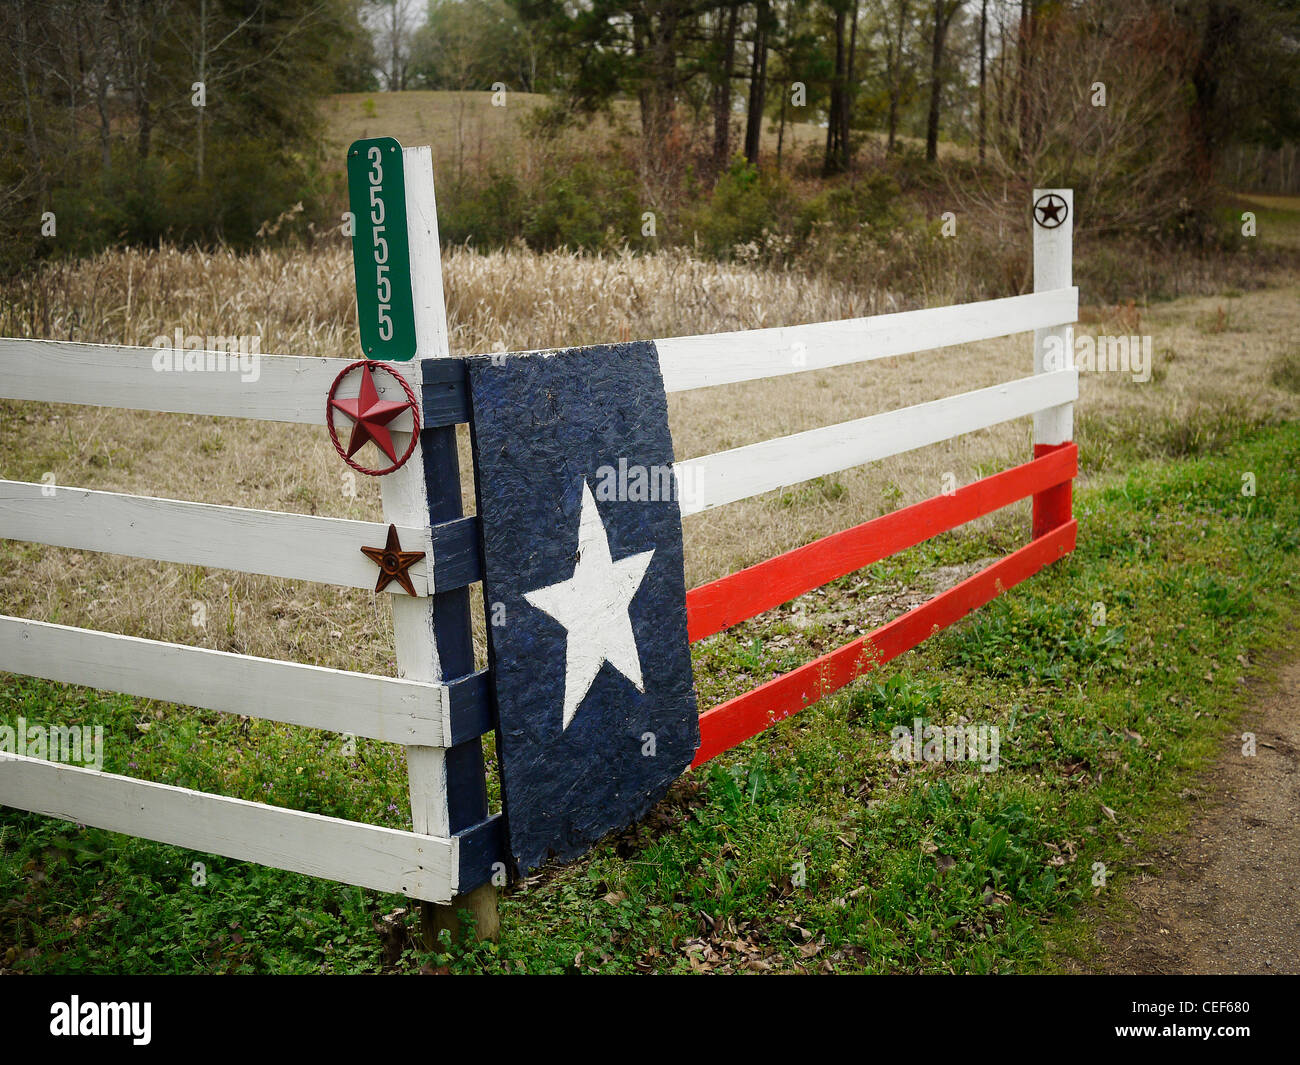 The Lone Star state, Texas pride shown at the ranch entrance where the fence replicates the flag of the Republic of Texas. Stock Photo